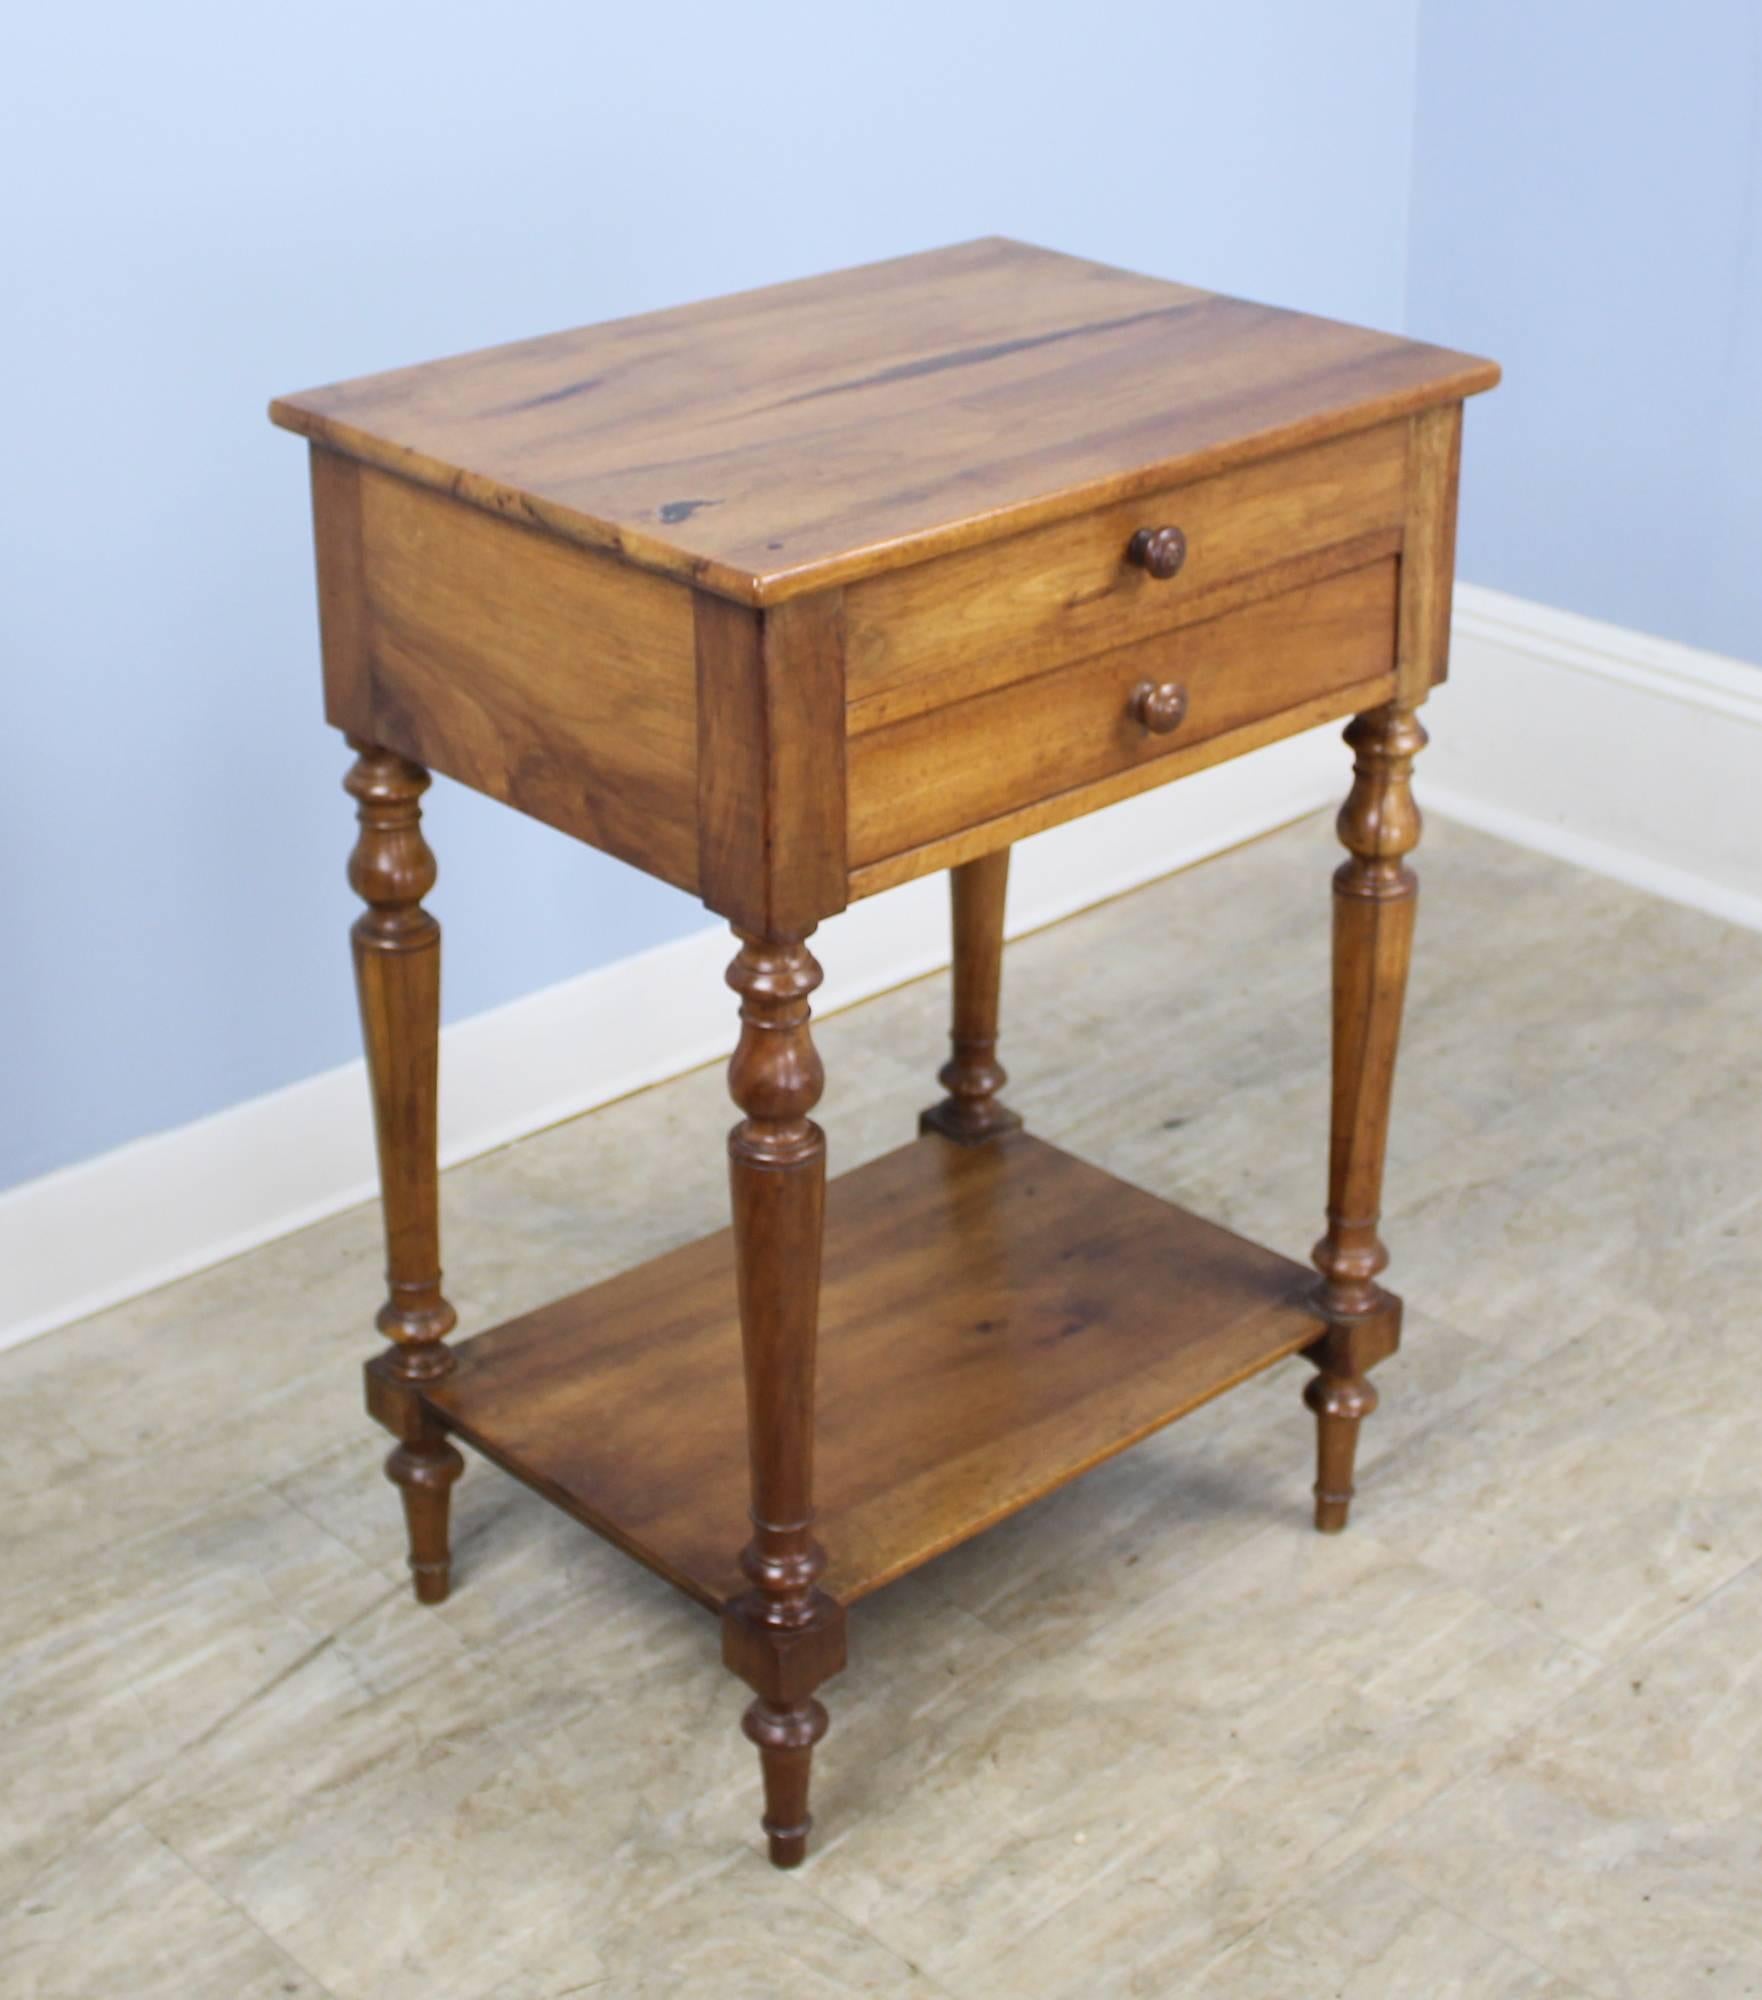 A splendid walnut side table with double drawers and graceful turned legs. Wonderful walnut grain and color and good patina. The lower shelf adds a note of utility.